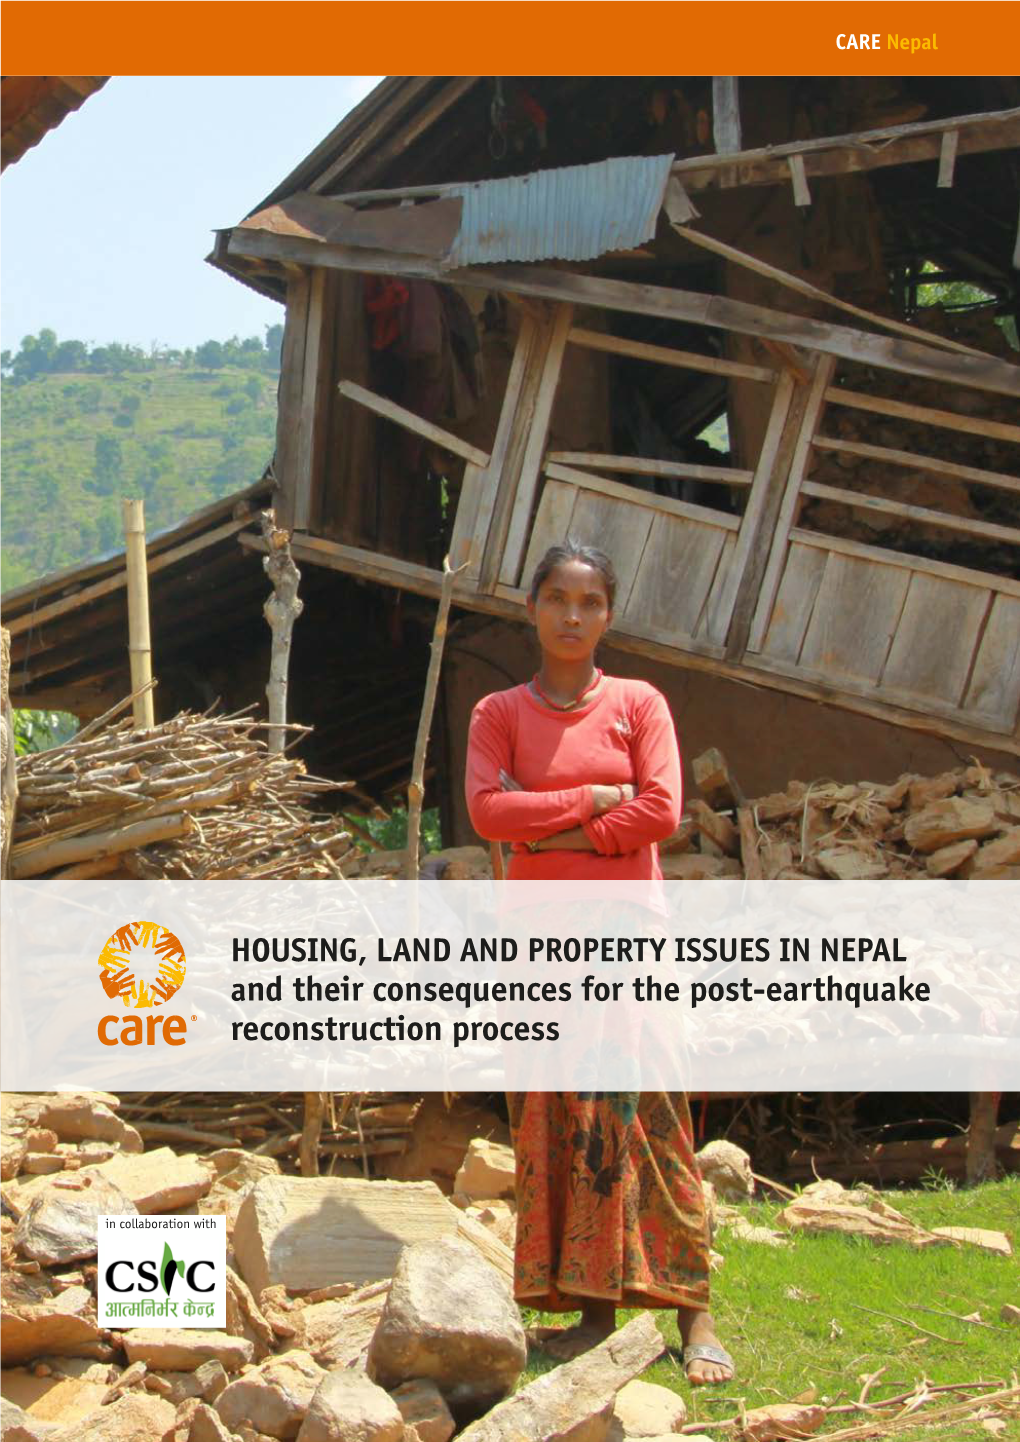 HOUSING, LAND and PROPERTY ISSUES in NEPAL and Their Consequences for the Post-Earthquake Reconstruction Process